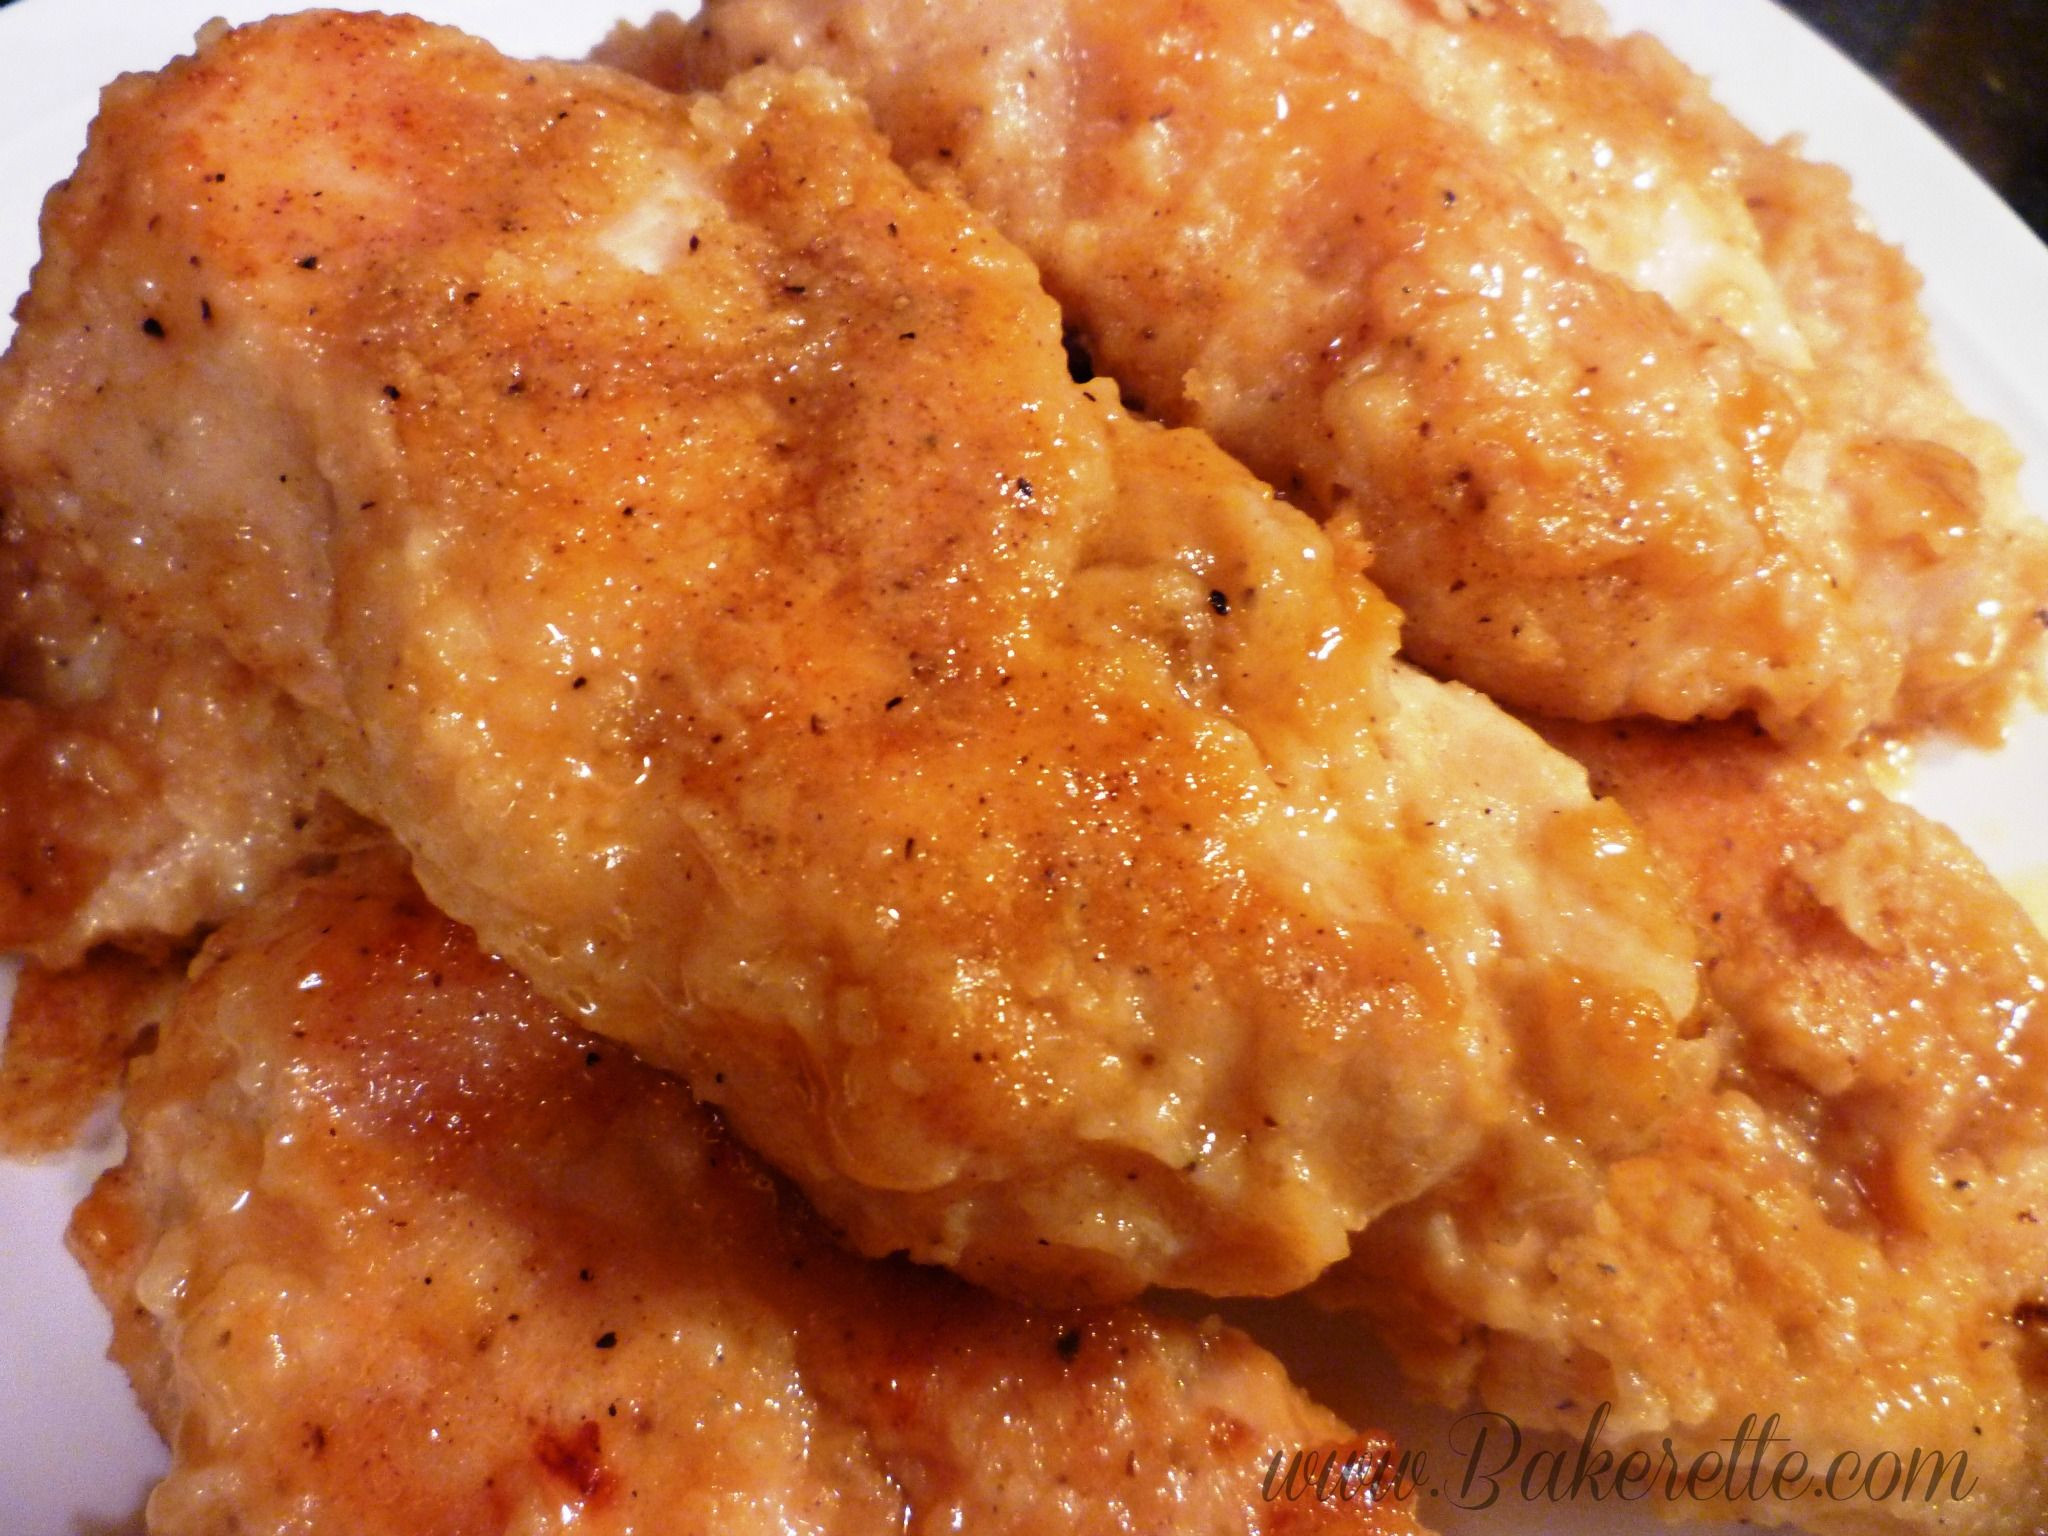 Deep Fried Chicken Breast Recipe
 deep fried chicken breasts filled with garlic butter